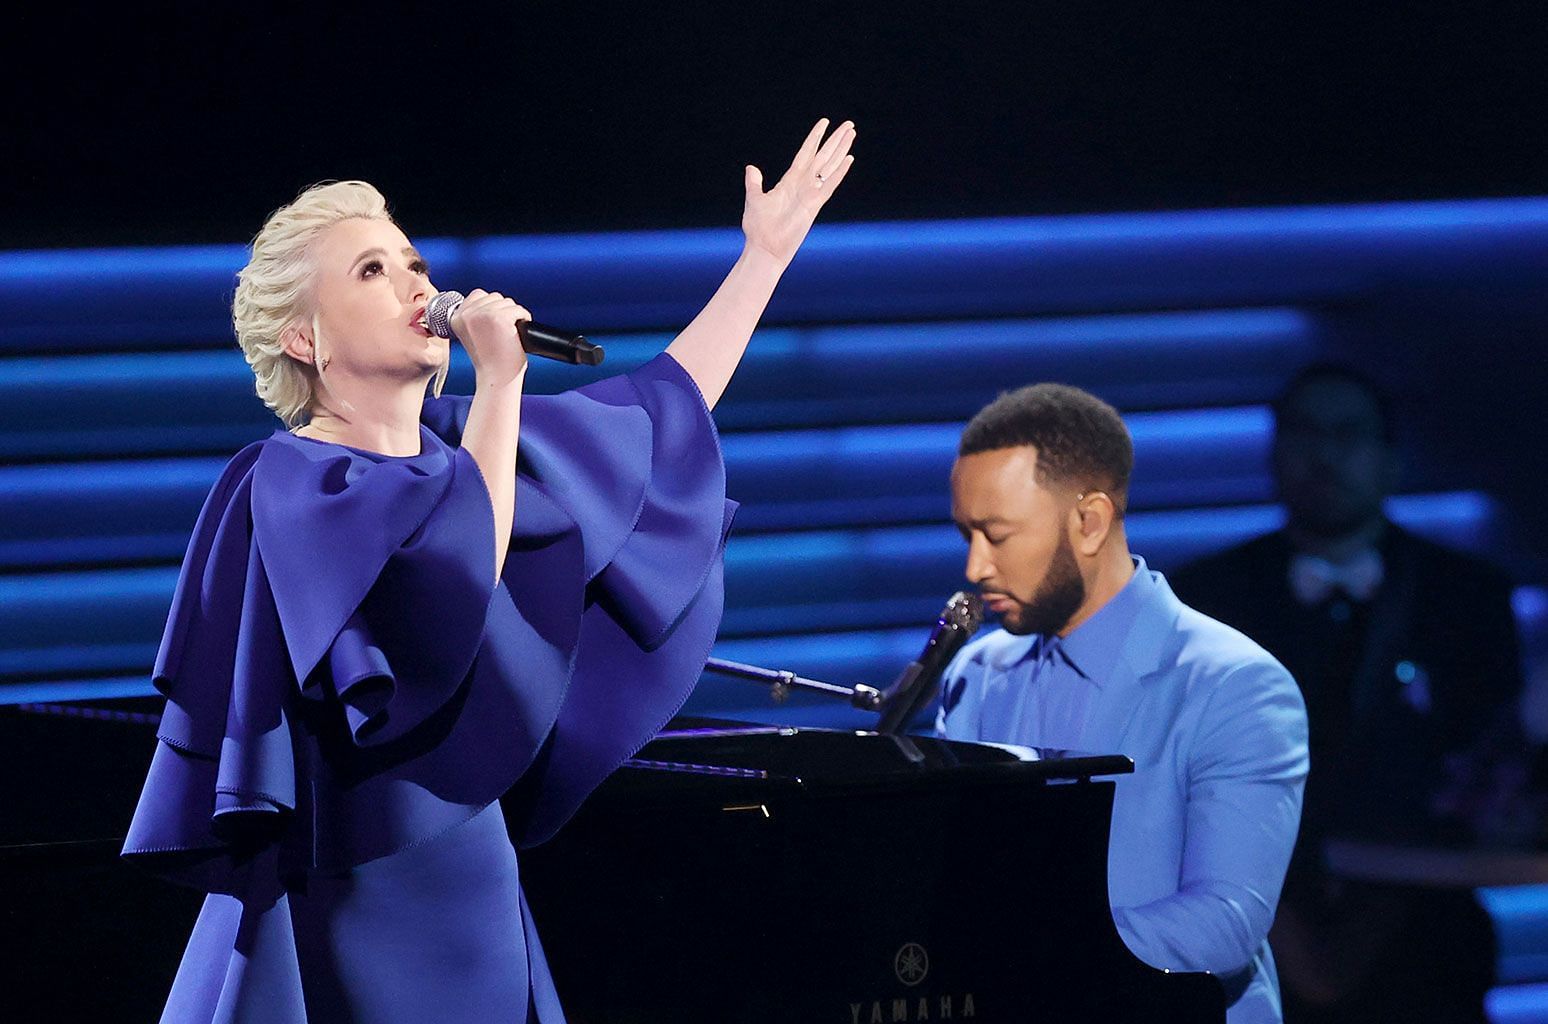 Mika Newton performs Free alongside John Legend at the 64th annual Grammy Awards (Image via Grammys/ Getty Images)